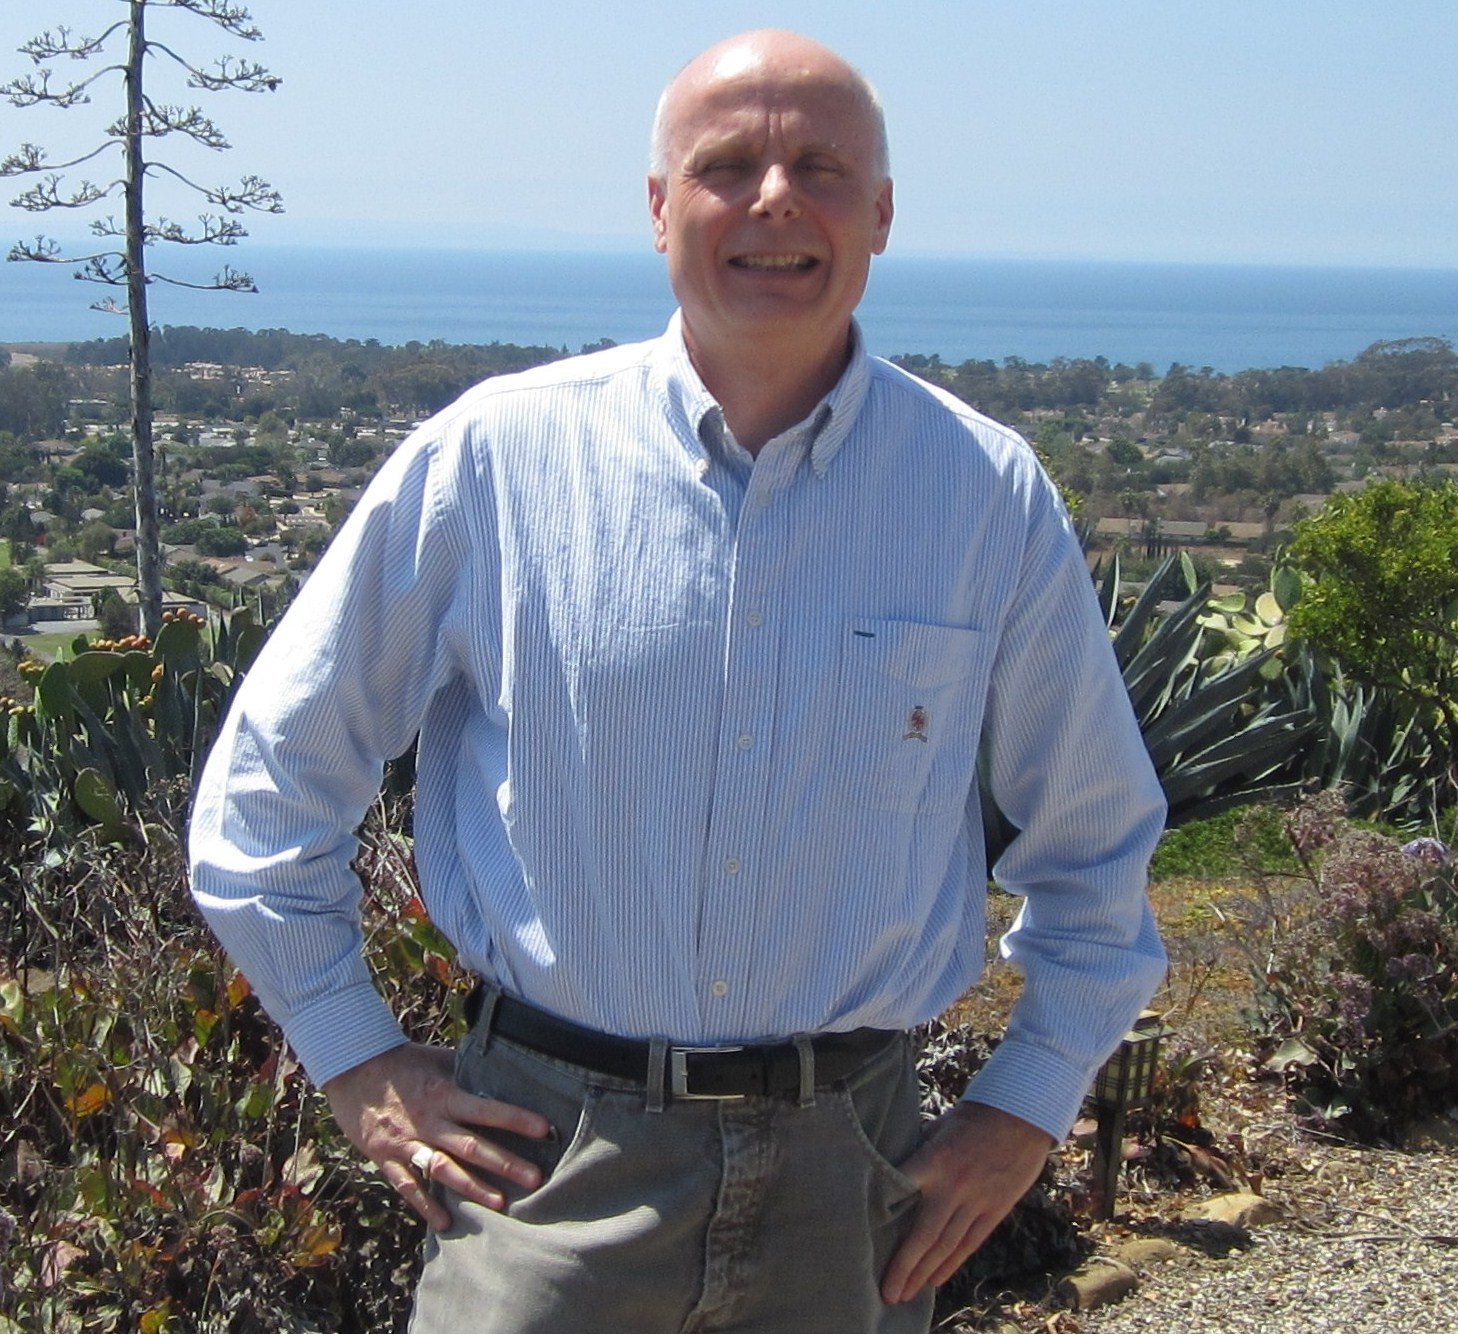 Toronto author Albert Bolter in Santa Barbara just prior to acceptance of the 2014 Global Ebook Awards GOLD Certificate for The C.A.T. Principle on August 20, 2014.